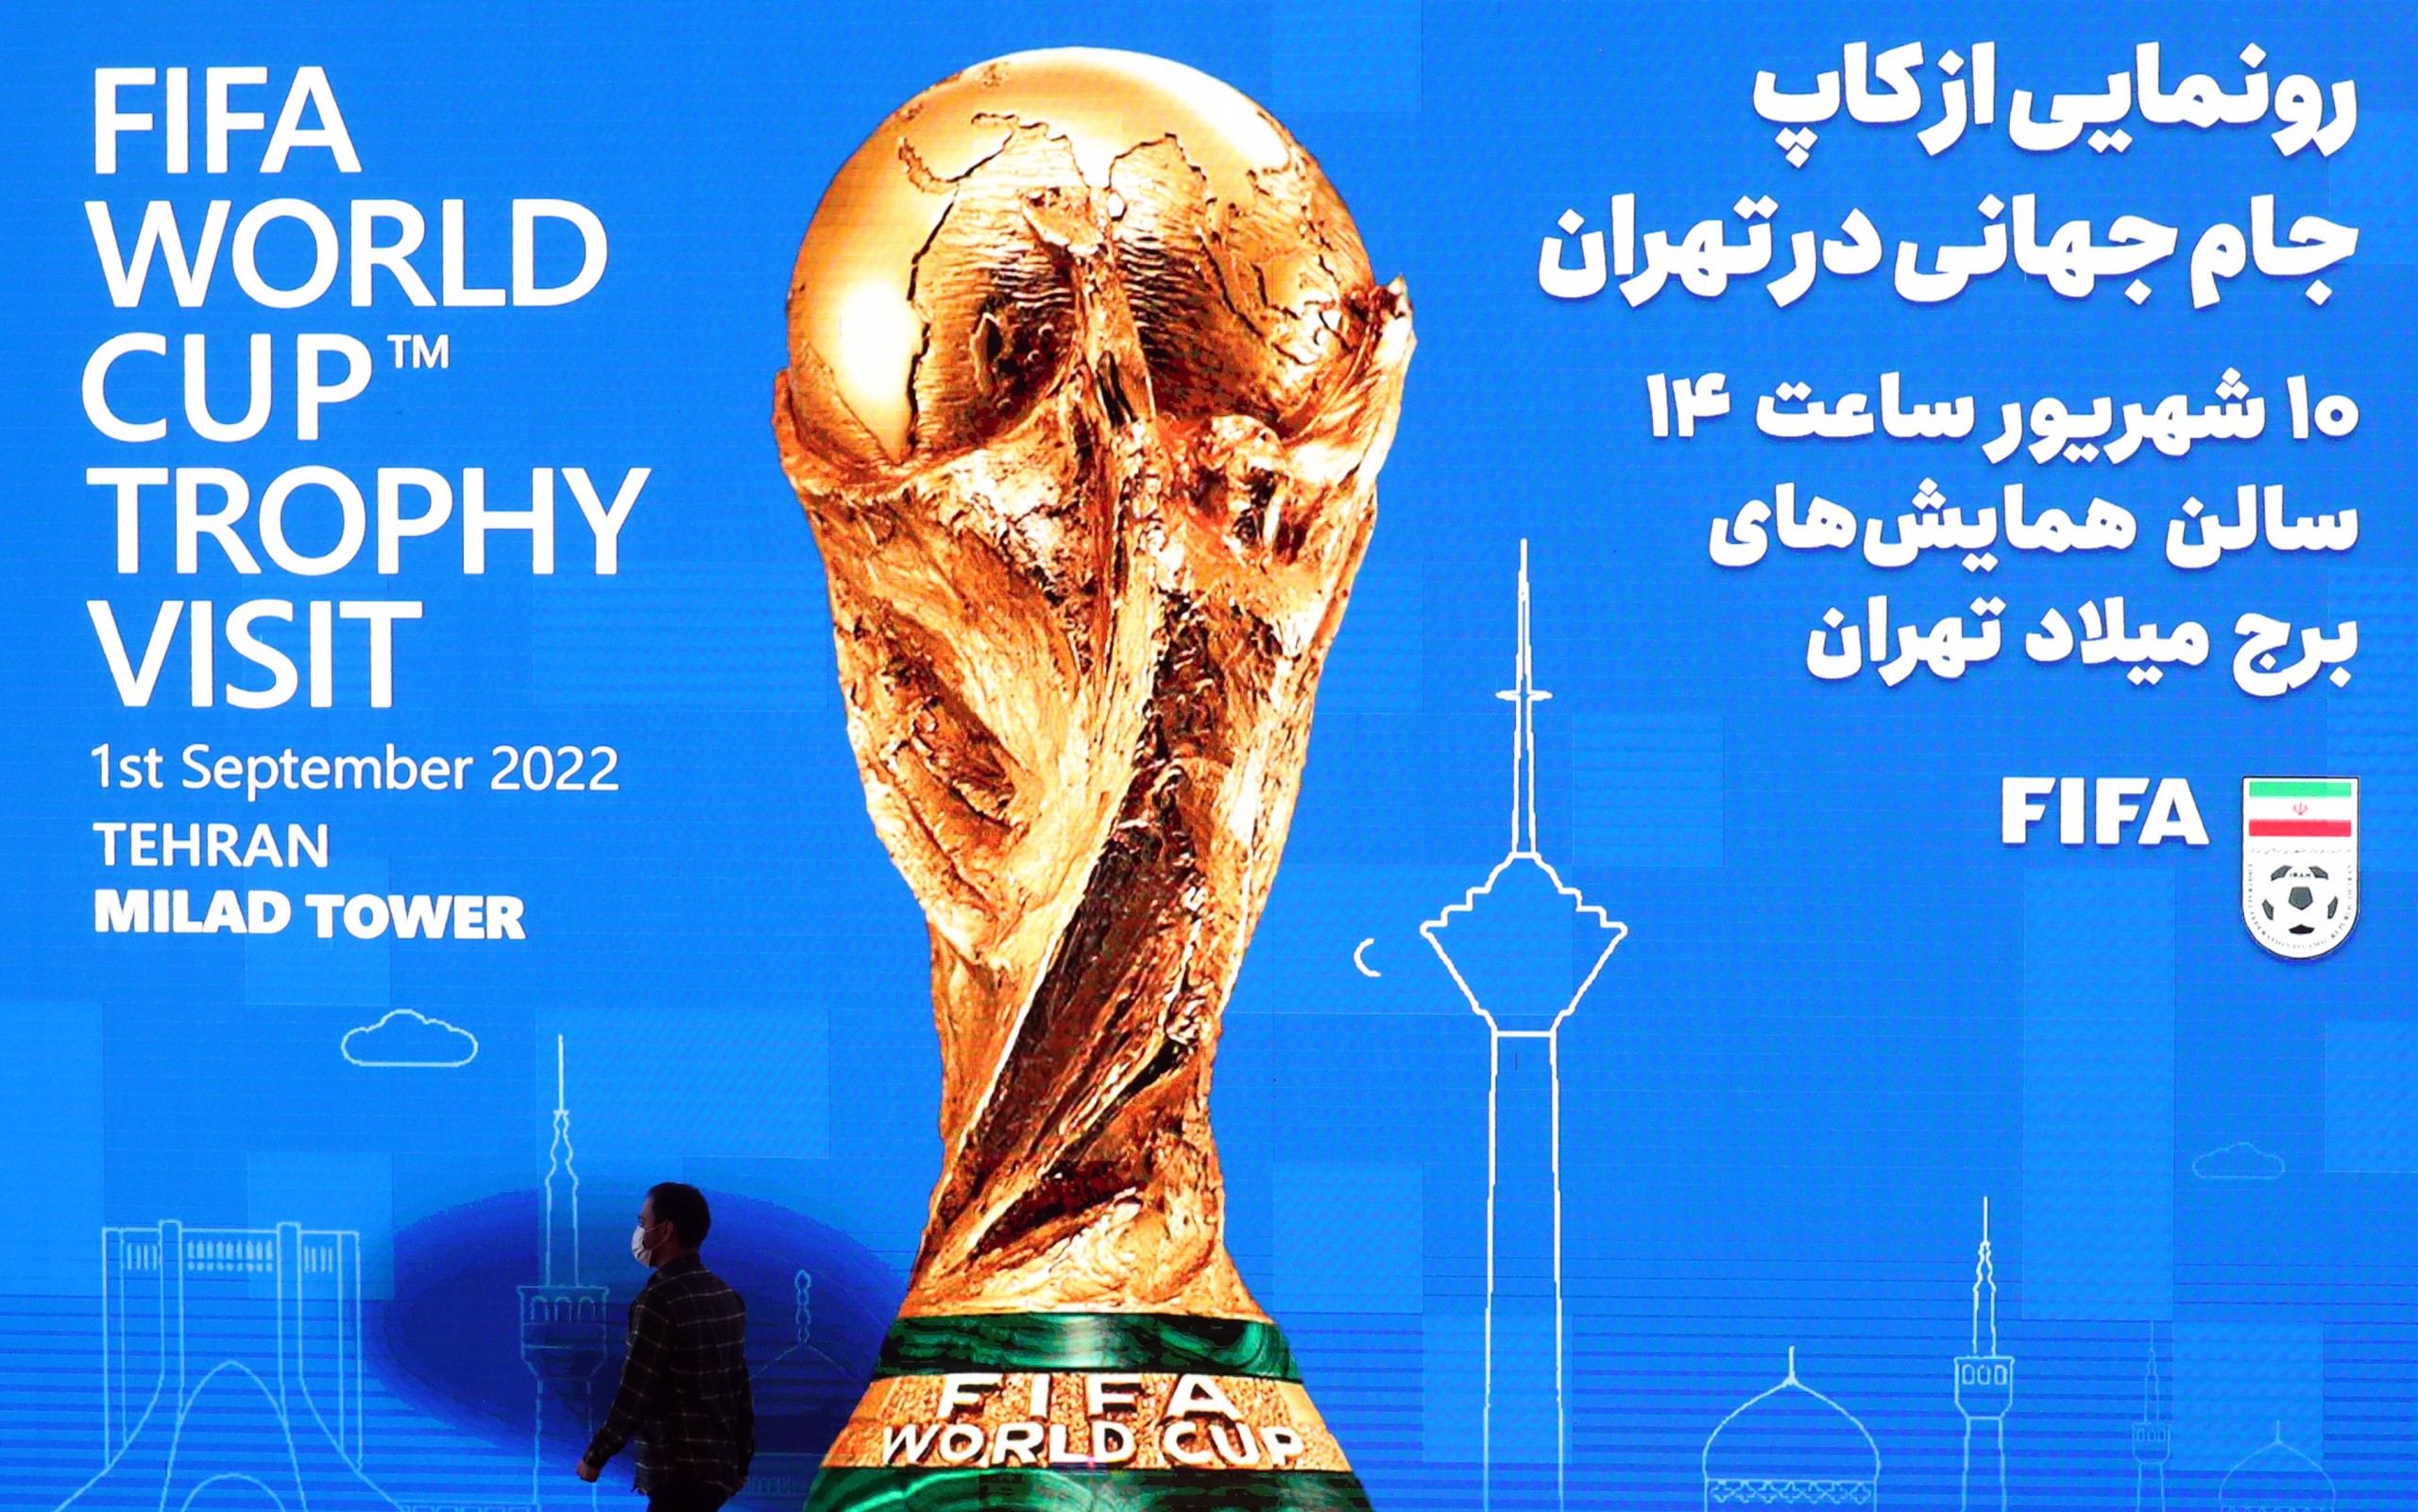 epa10152381 An Iranian official walks during a ceremony to unveil the FIFA World Cup Trophy at a hall in Milad Tower complex, in Tehran, Iran, 01 September 2022 as part of the global trophy tour.  EPA/ABEDIN TAHERKENAREH